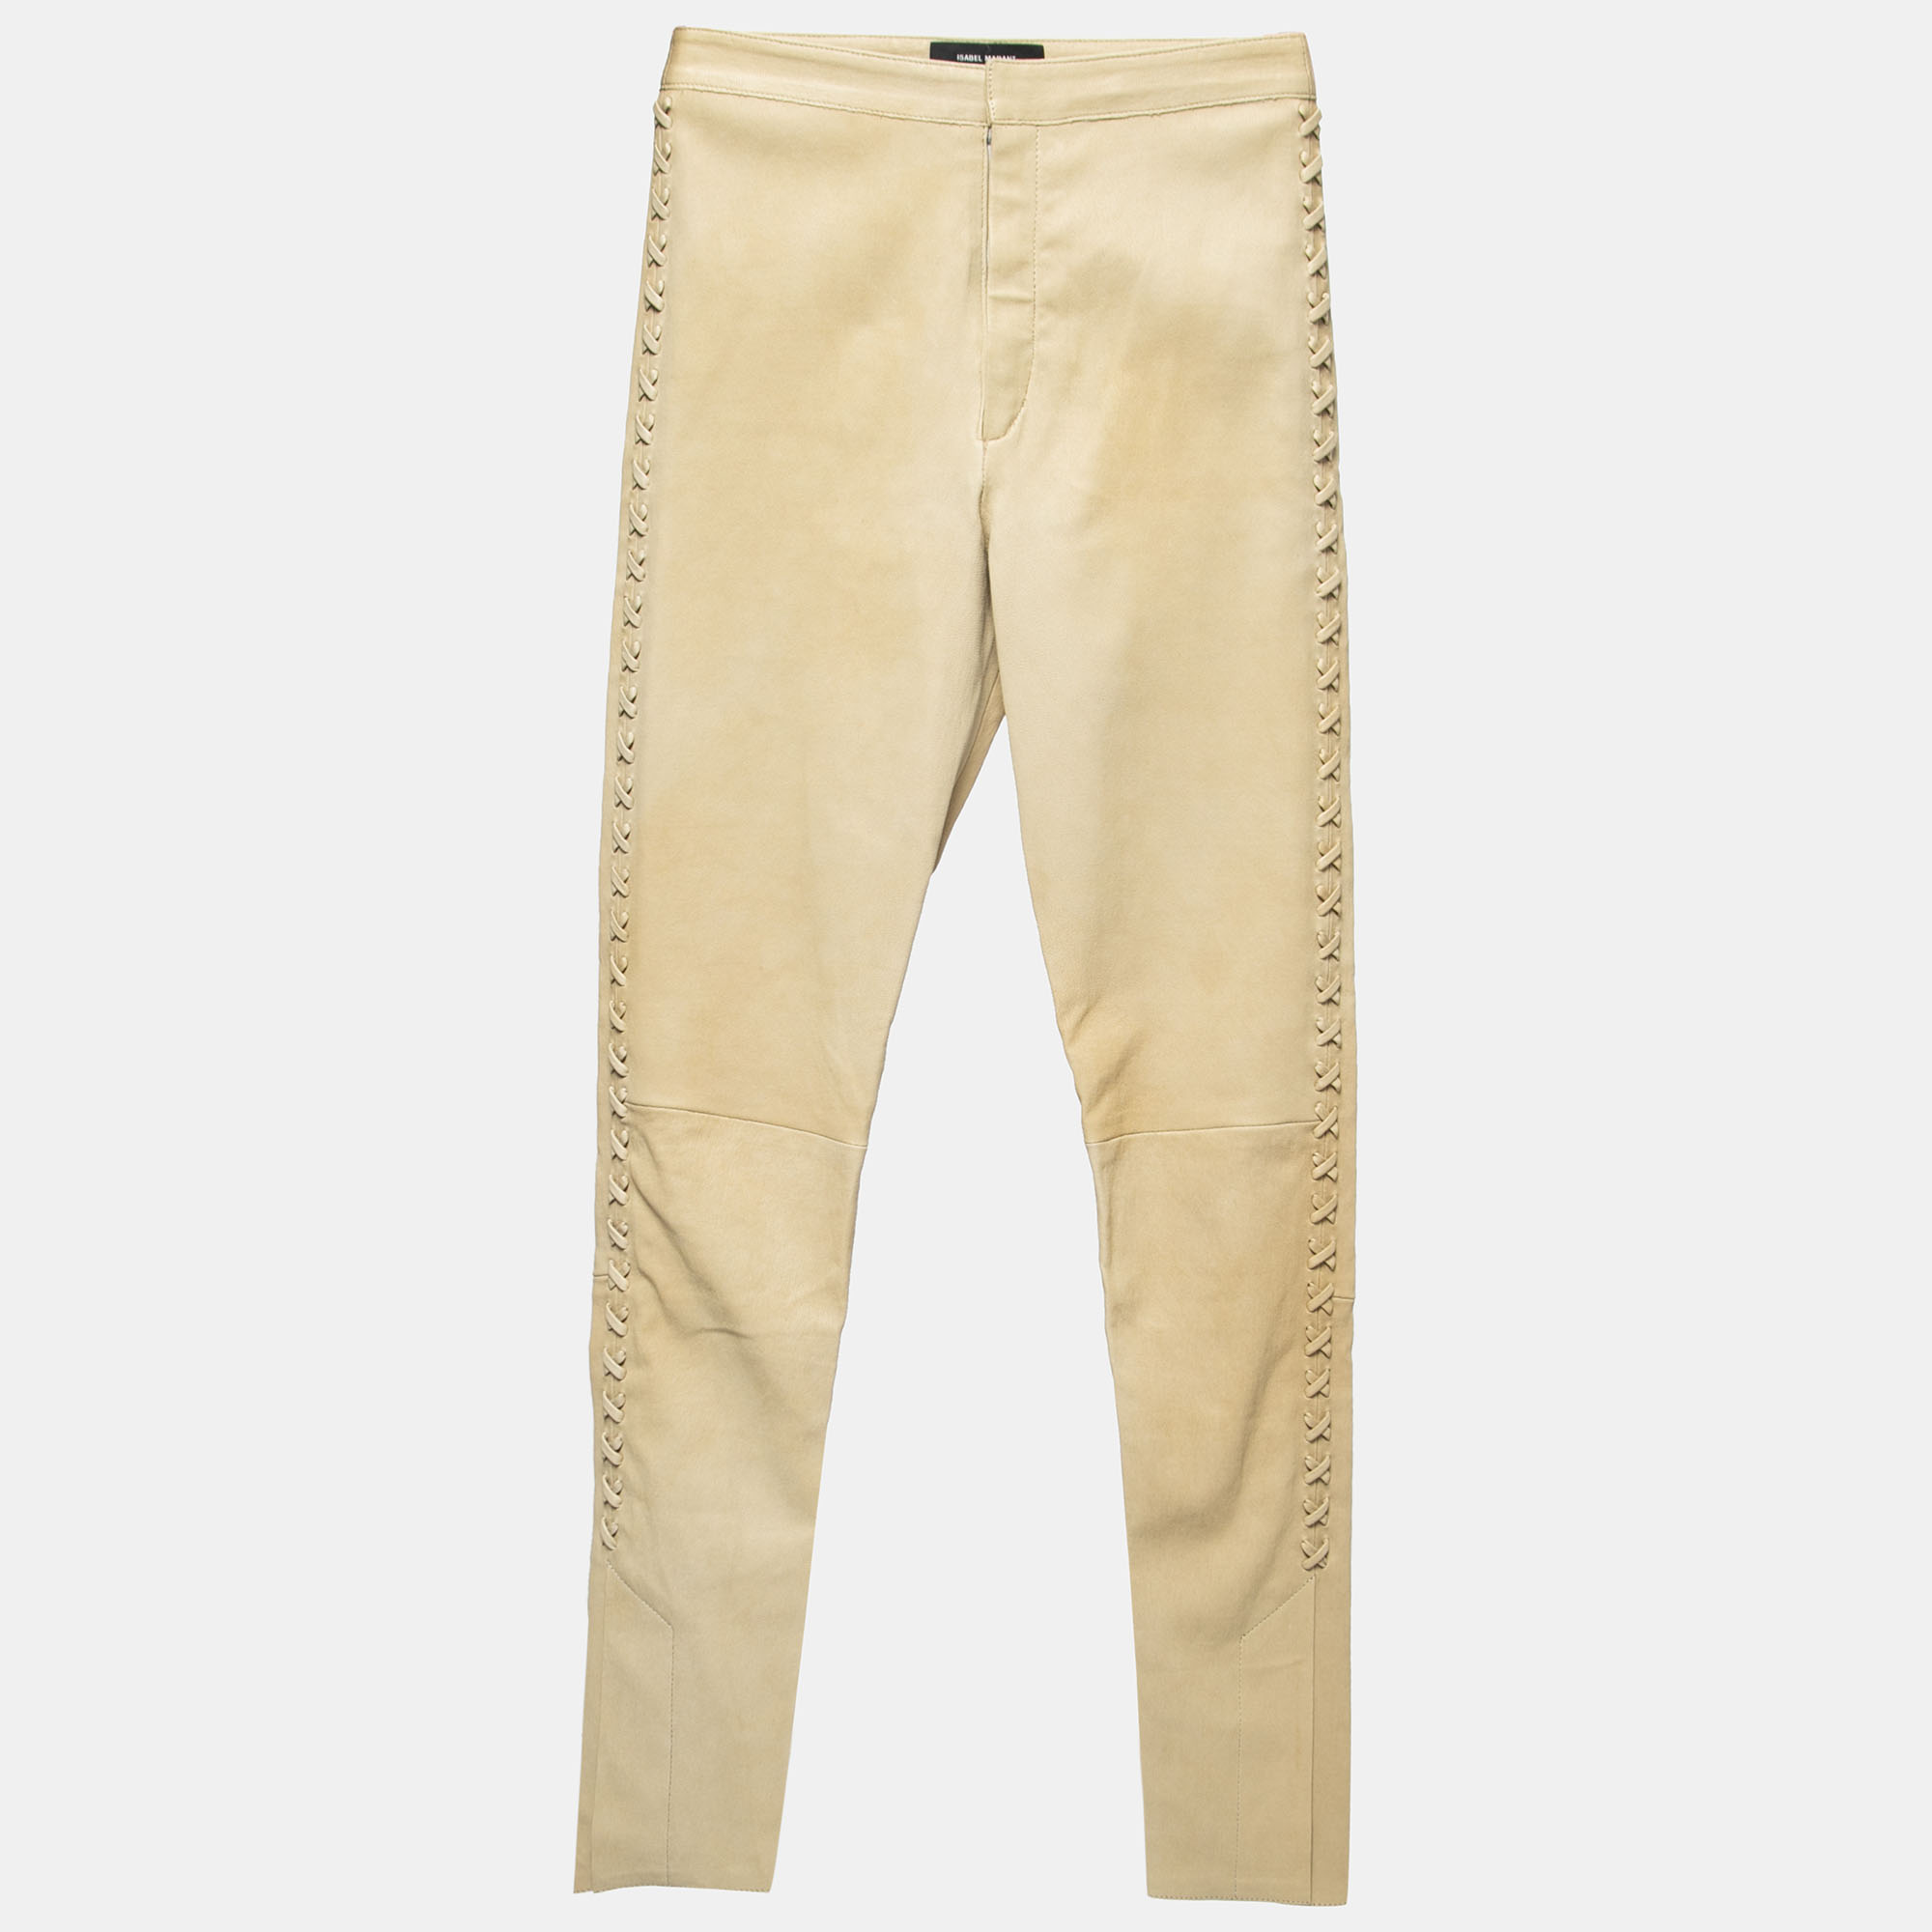 Isabel Marant Beige Leather Lace-Up Skinny Trousers S